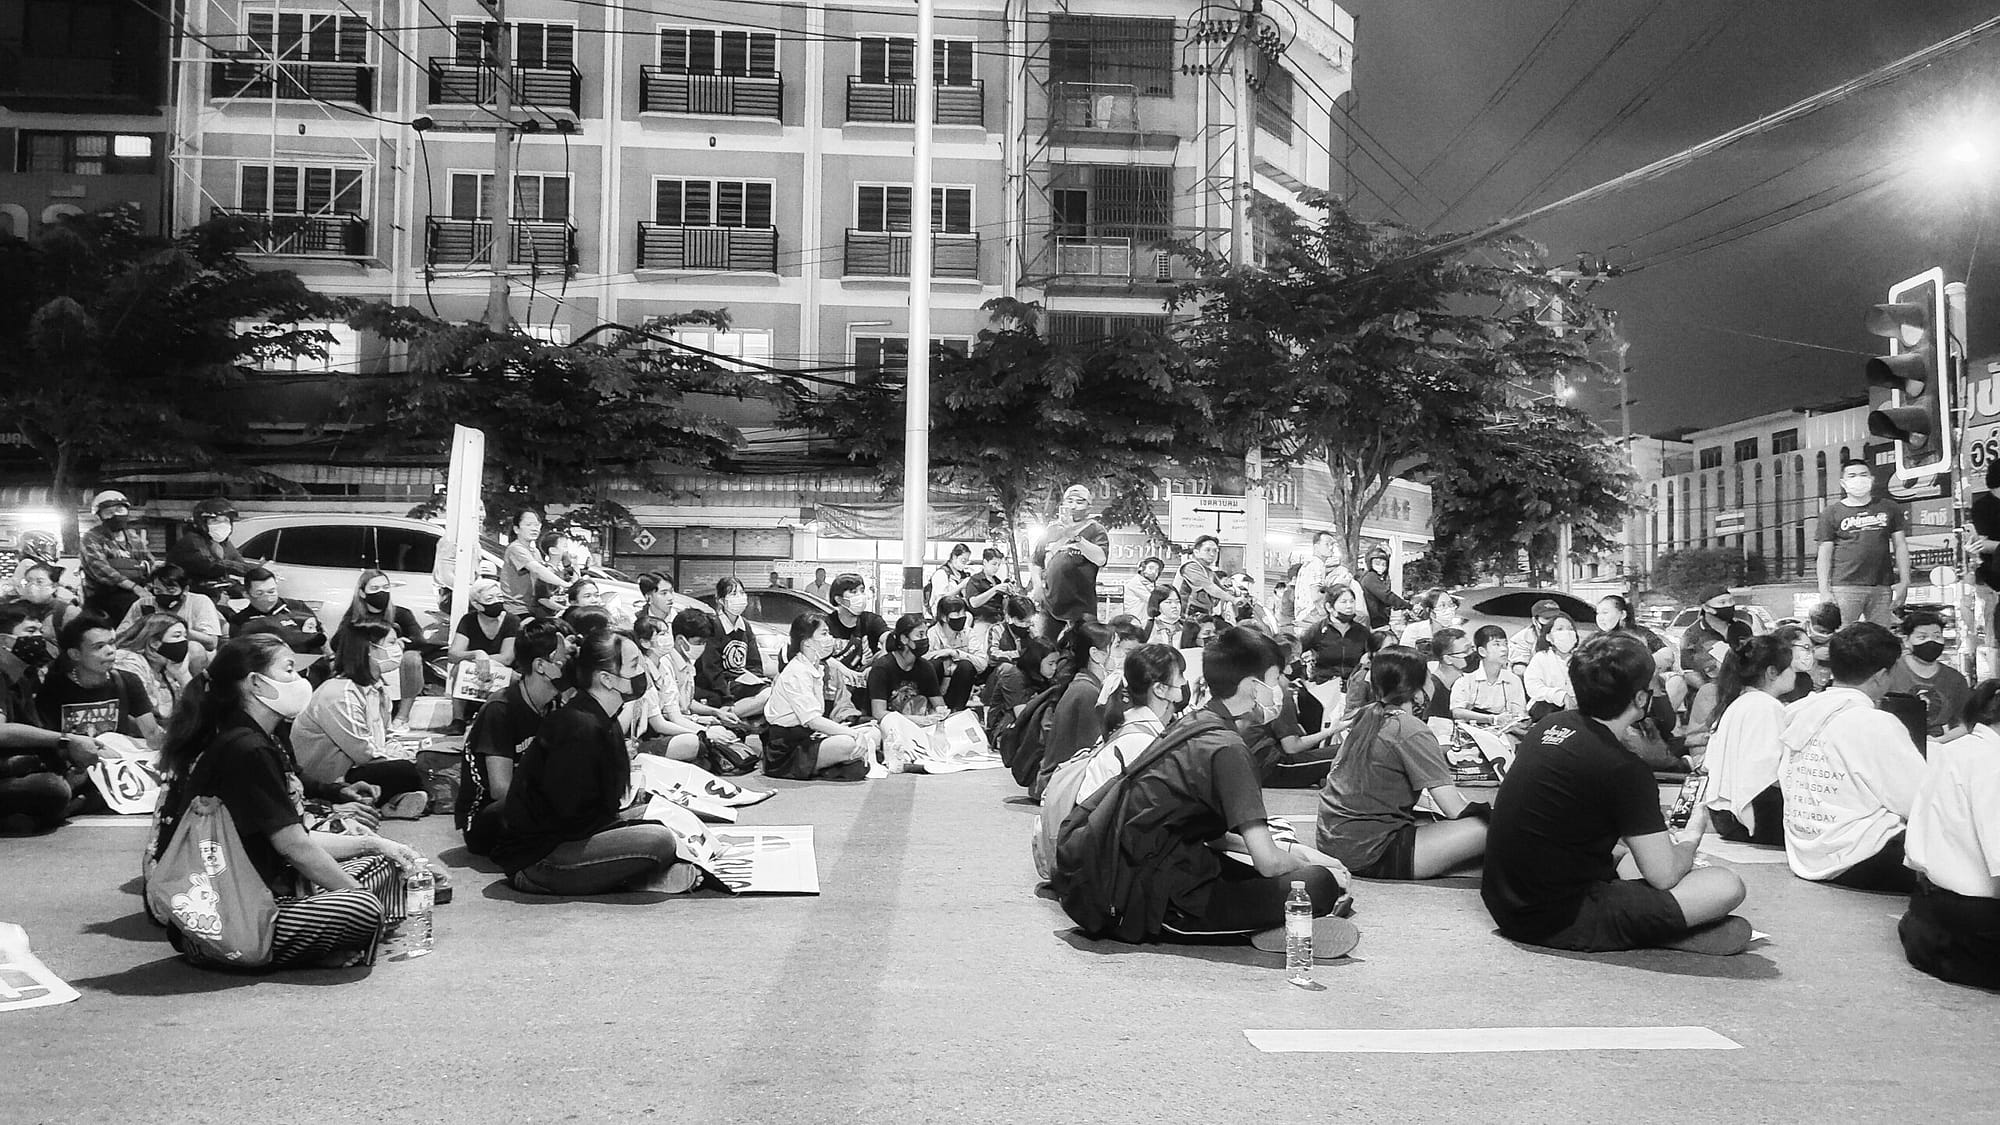 Bangkok, Thailand, October 2020. Students and people sit and stand in the middle of the street to protest. Photo: Rungkh / Shutterstock.com